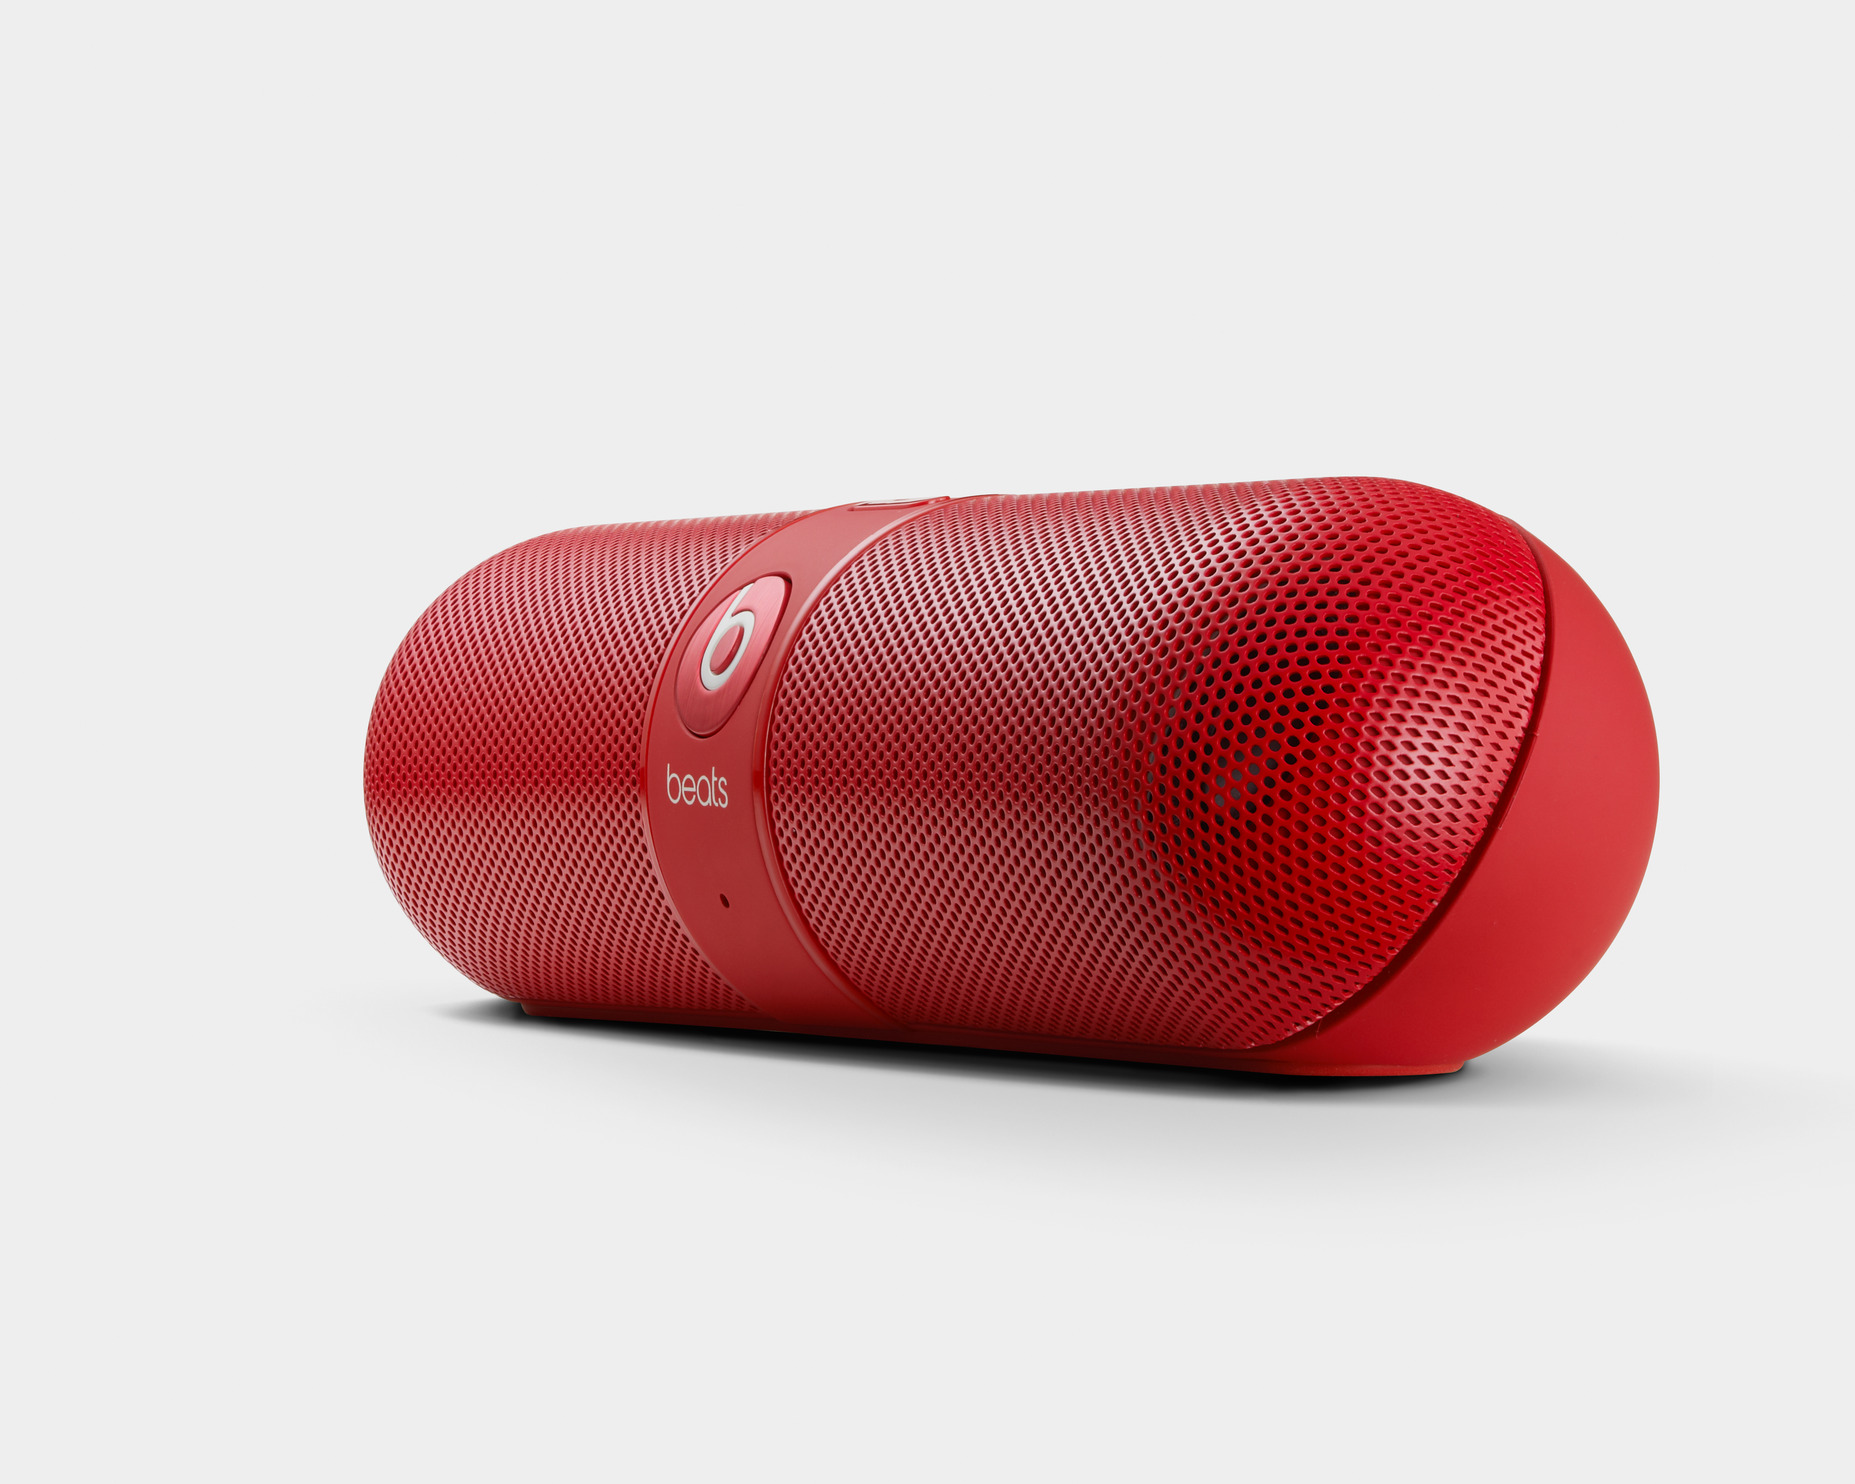 Beats Pill Wireless Speaker: Good sounds come in small, medicinal looking packages